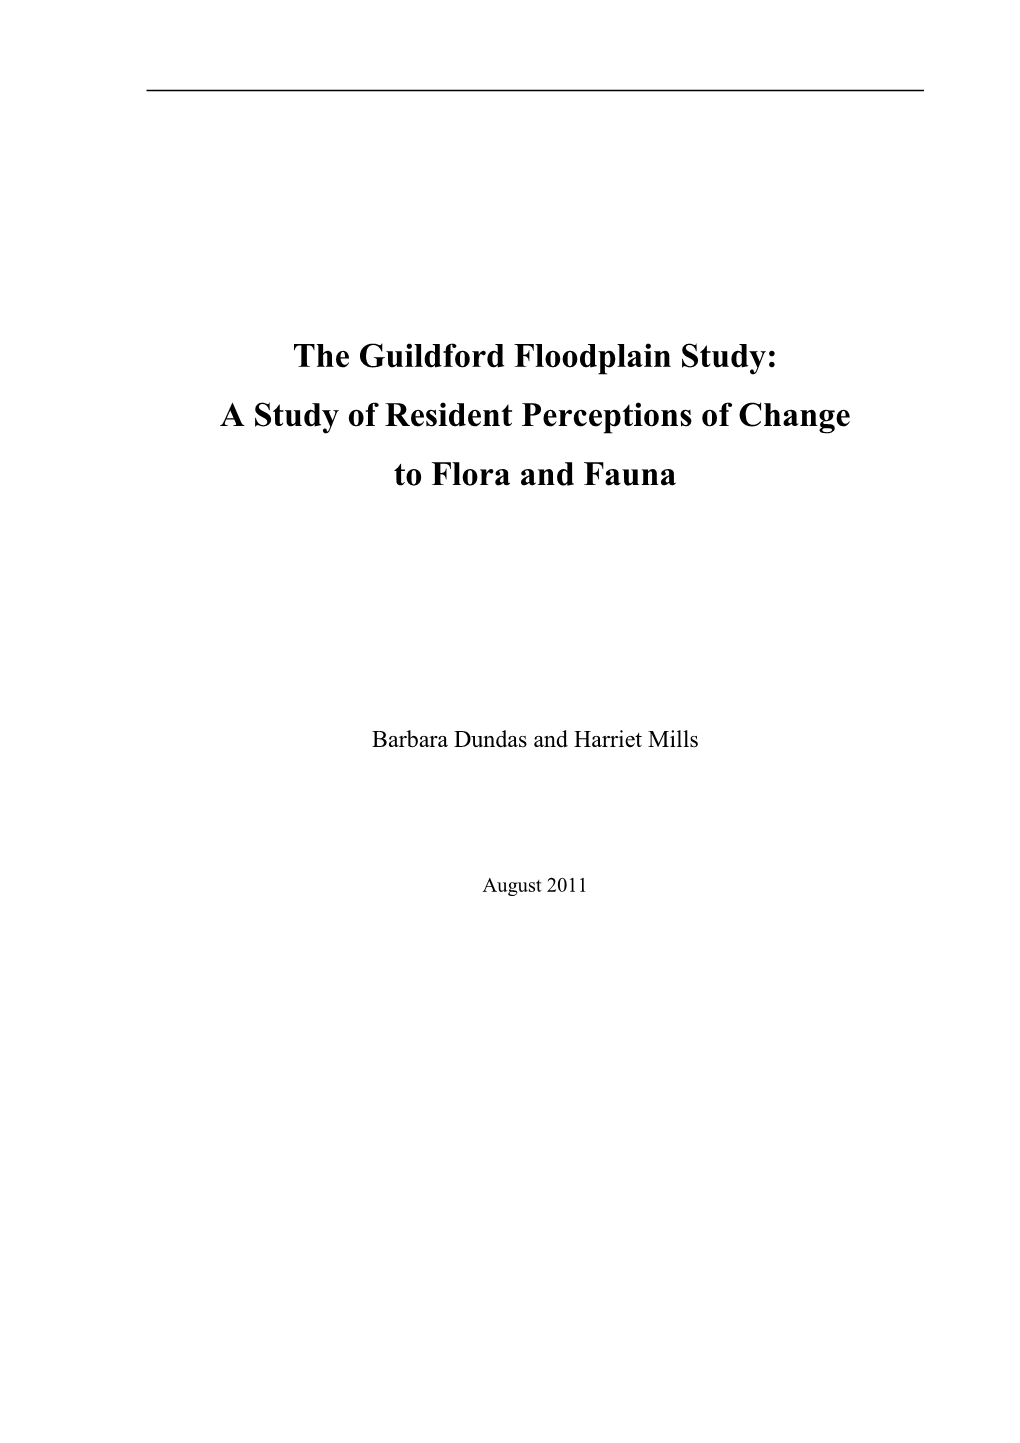 A Study of Resident Perceptions of Change to Flora and Fauna